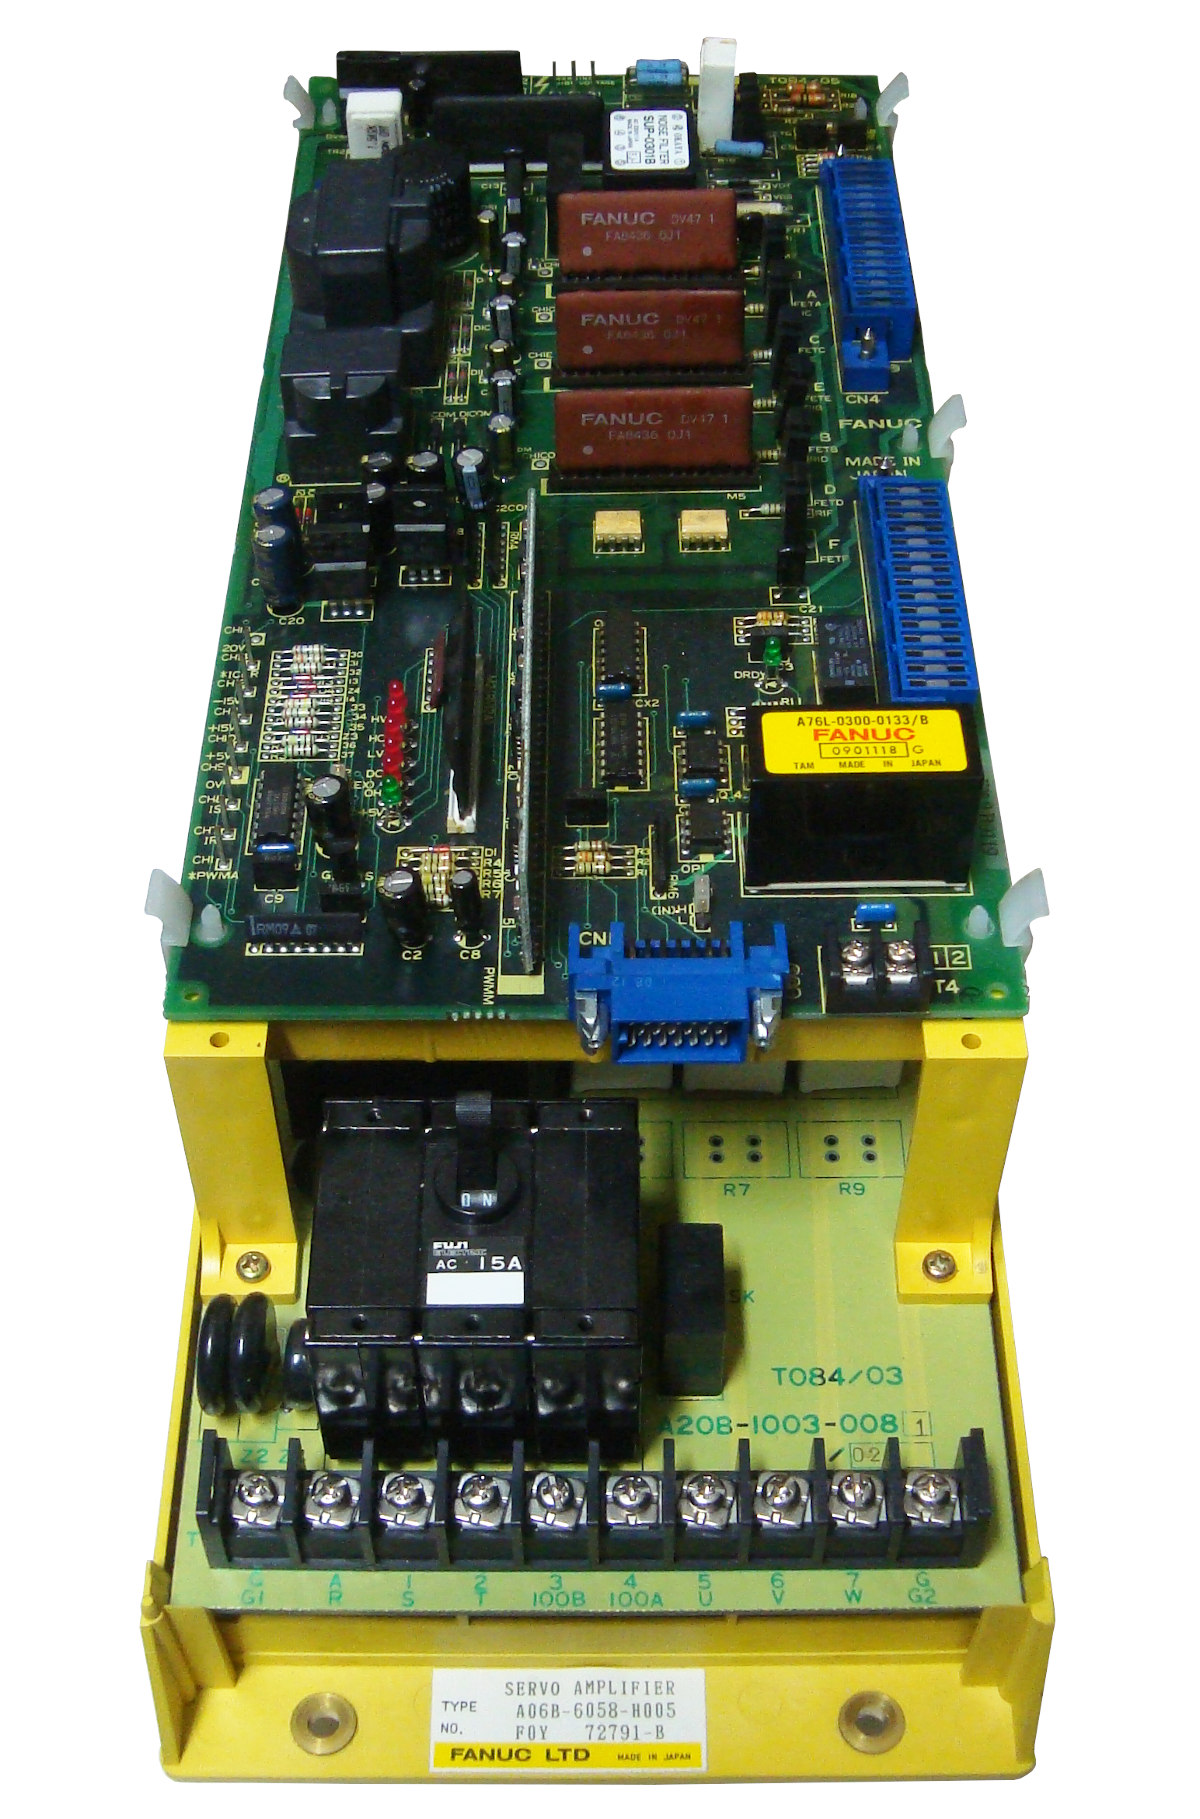 2 Repair Service A06b-6058-h005 Fanuc With Warranty